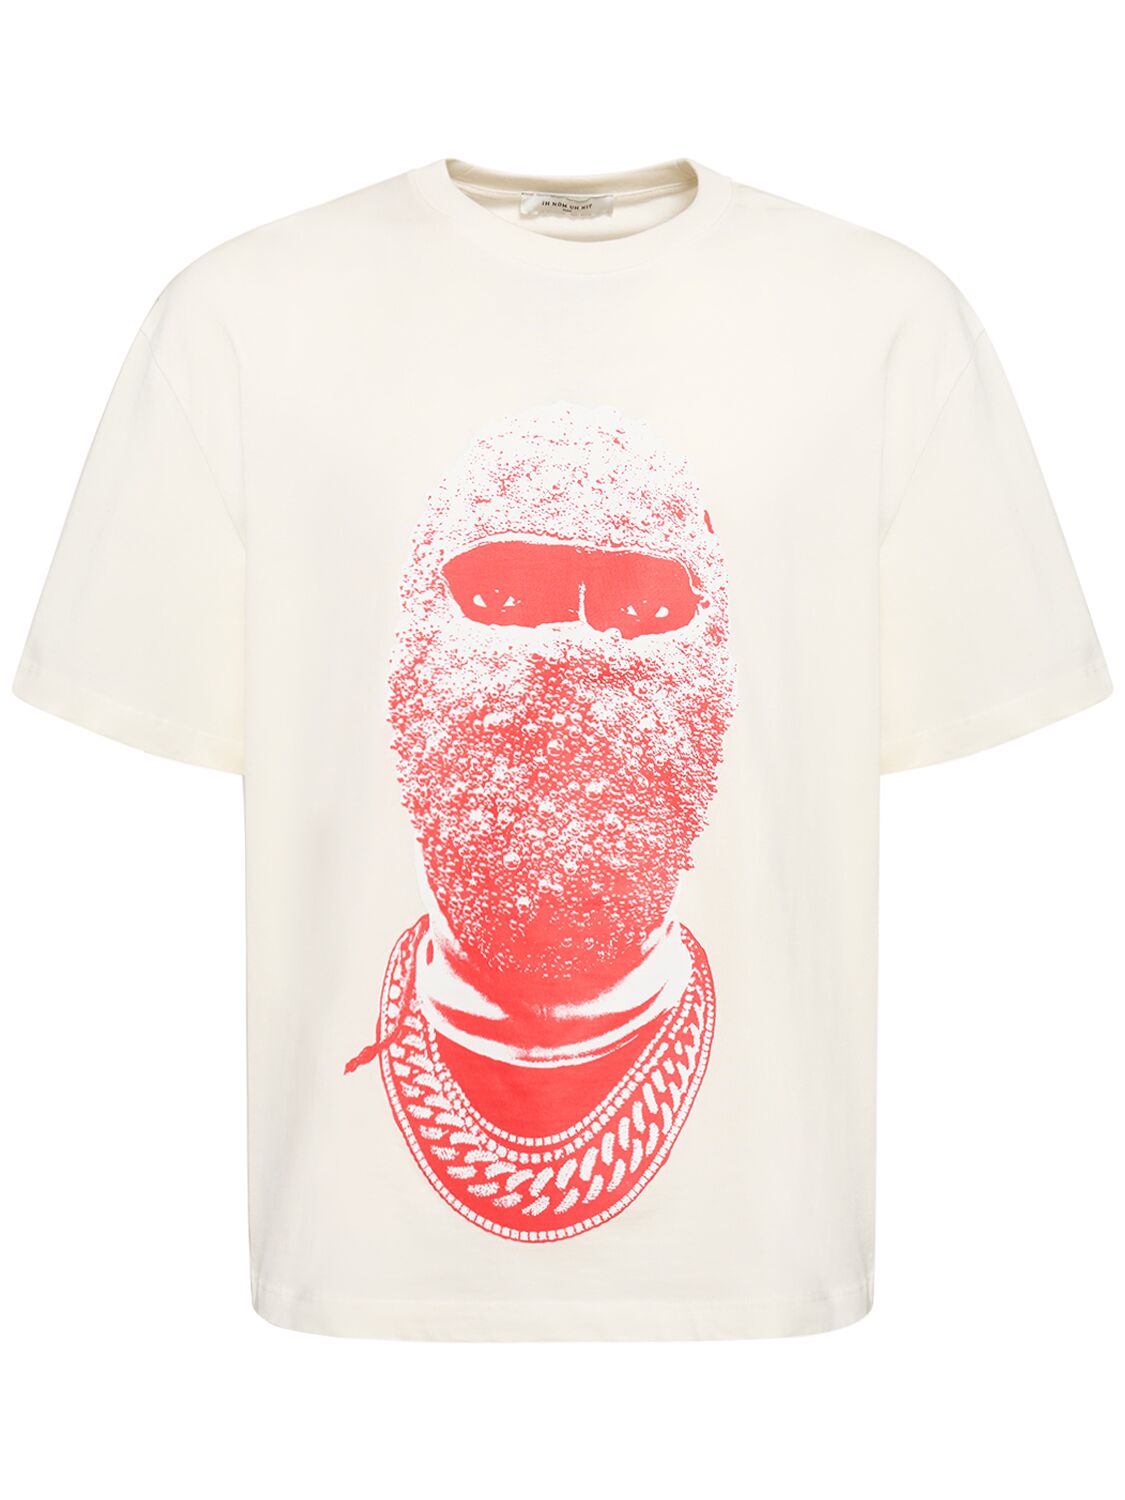 Image of Red Mask T-shirt